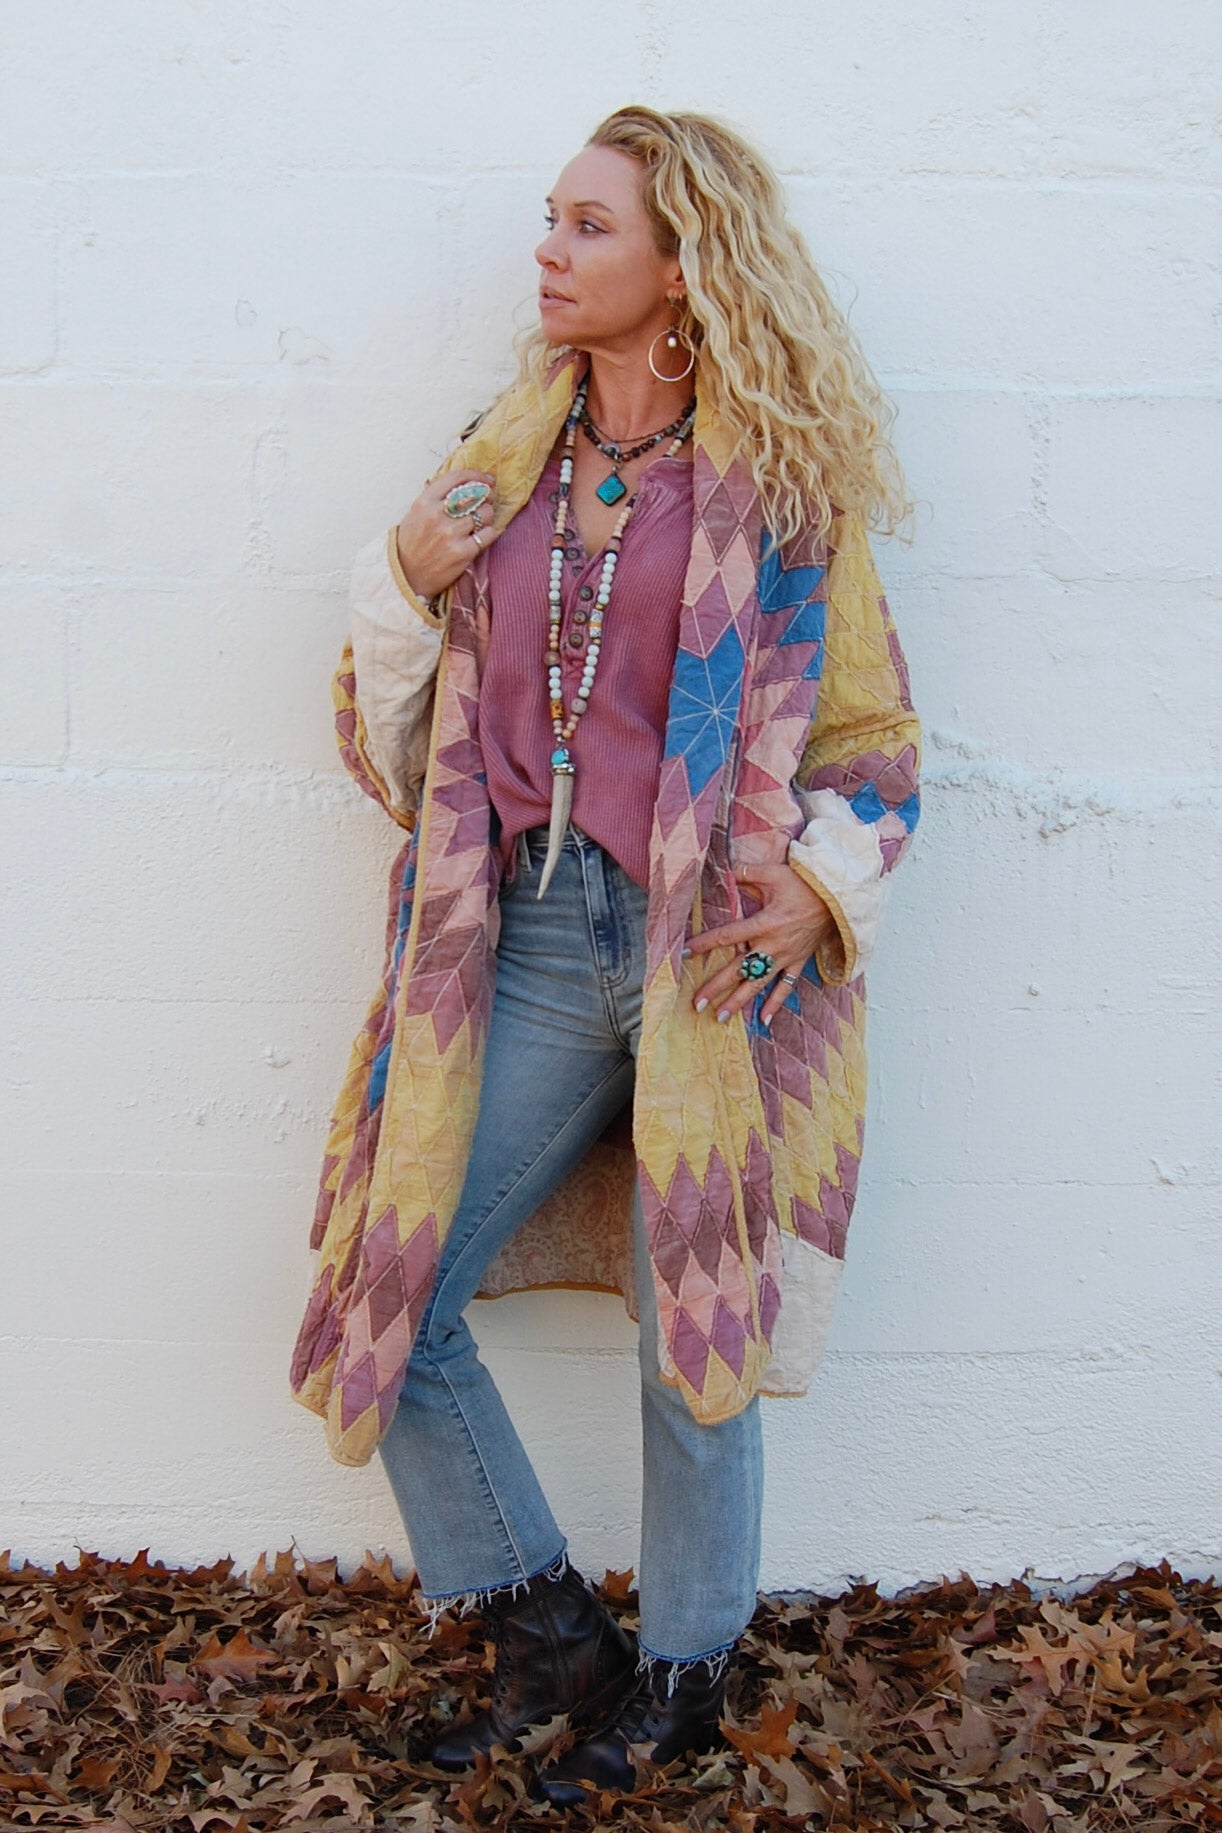 Load image into Gallery viewer, Magnolia Pearl Quiltwork Taos Kimono in Mateo - SpiritedBoutiques Boho Hippie Boutique Style Jacket, Magnolia Pearl
